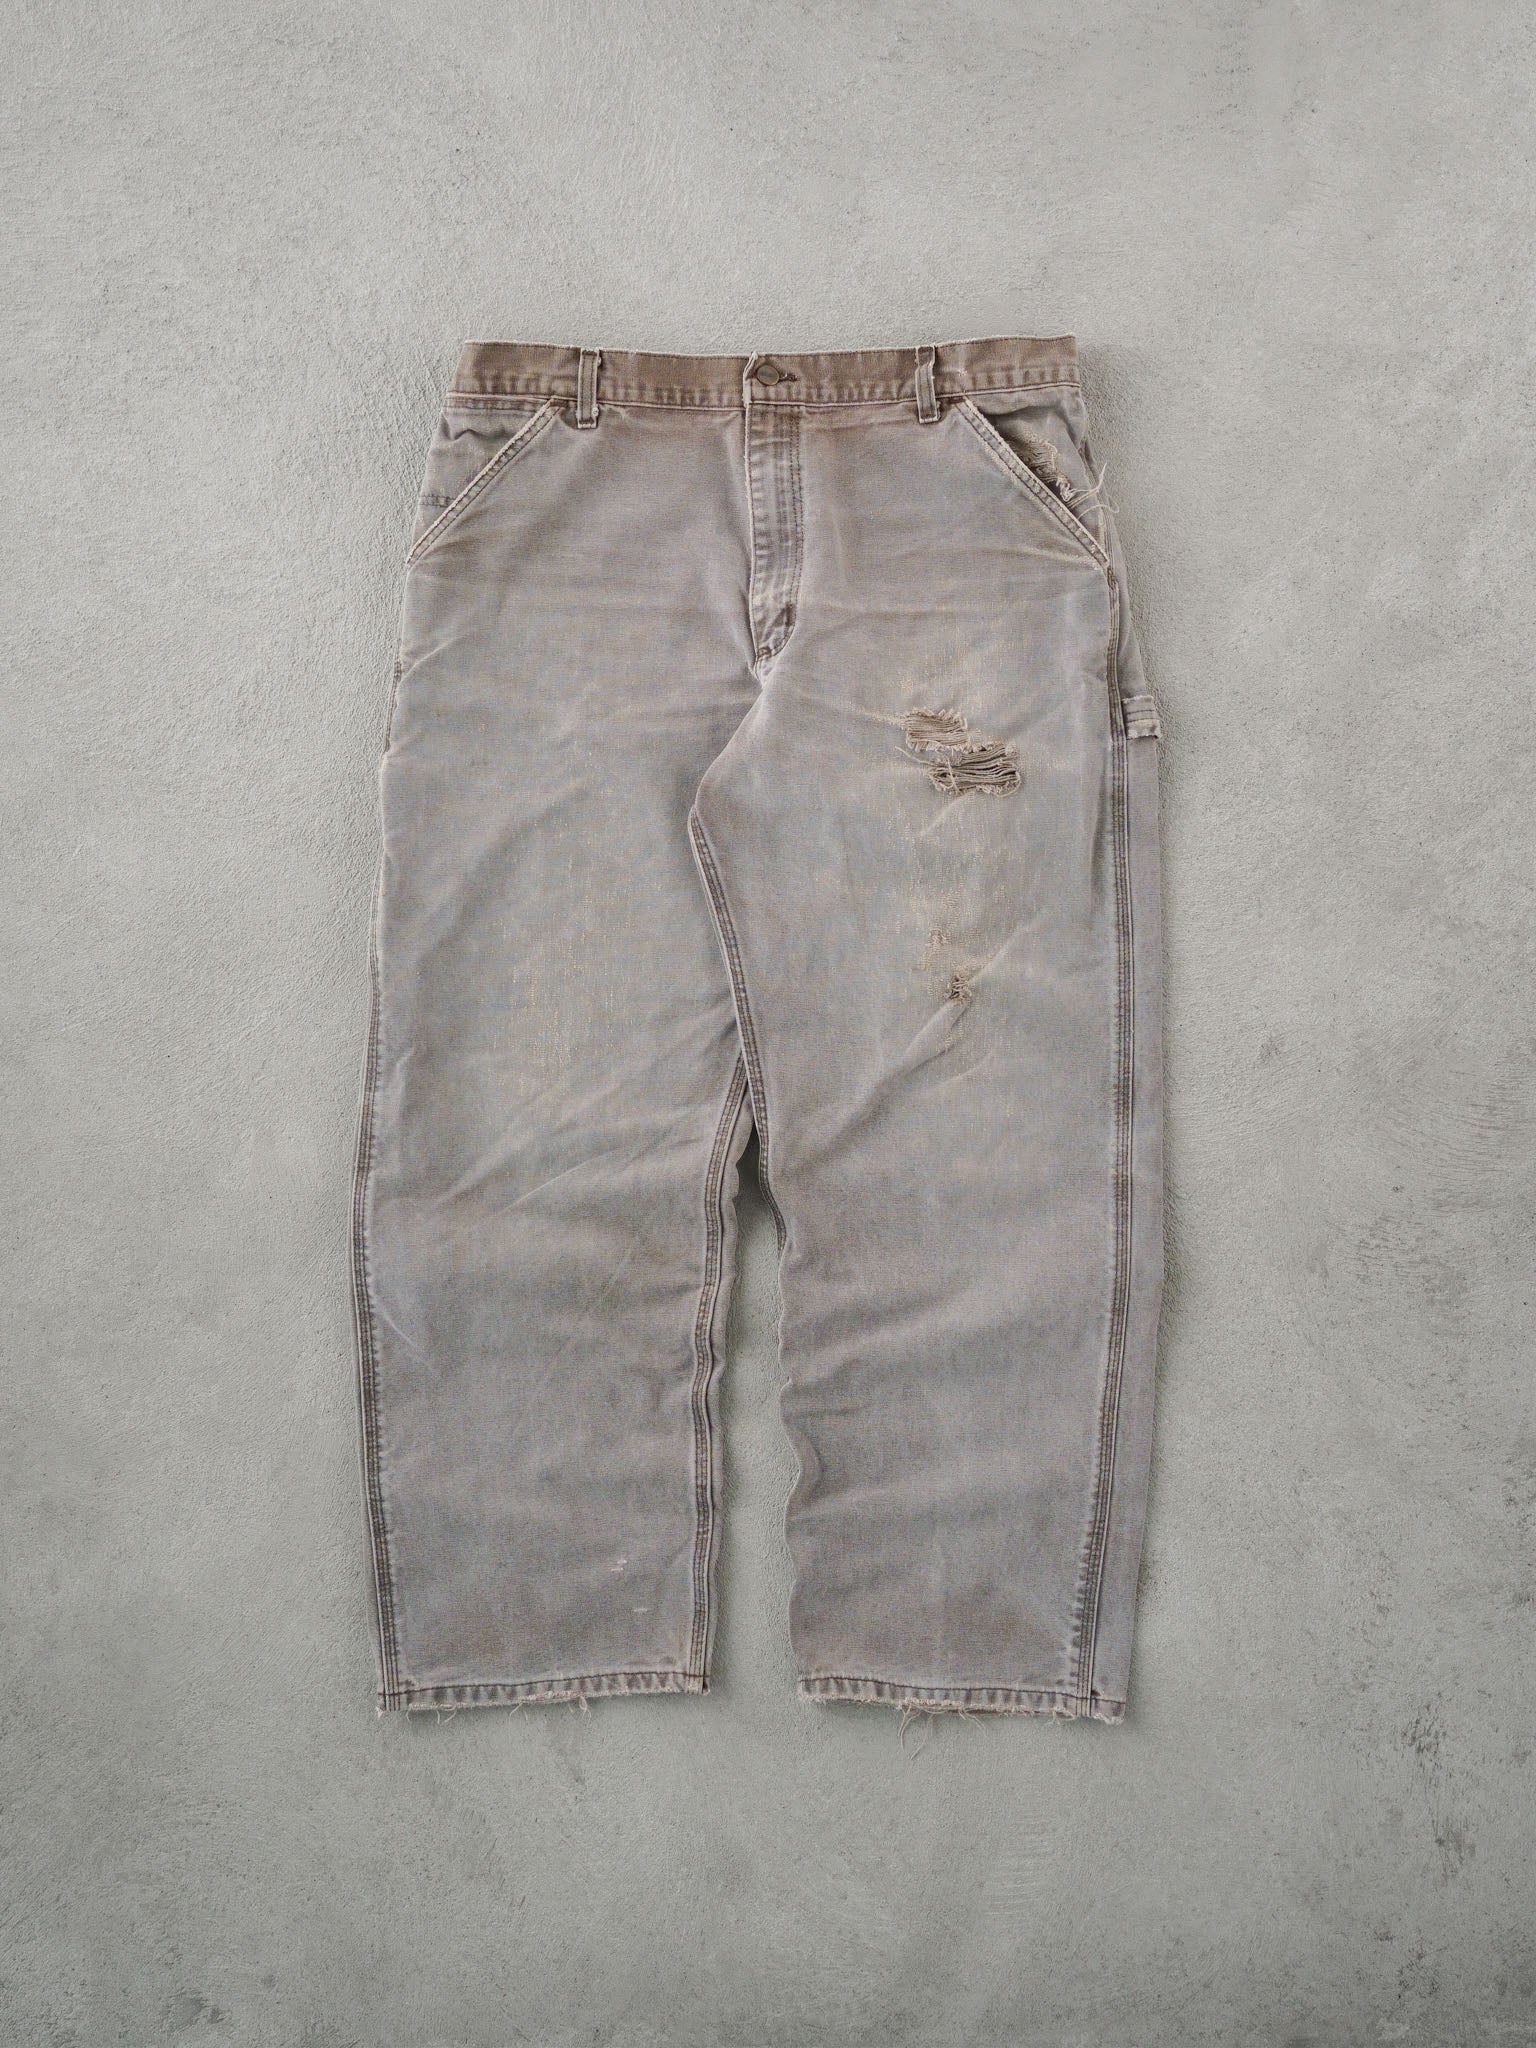 Vintage 90s Washed Light Brown Faded Carhartt Carpenter Pants (38x30)